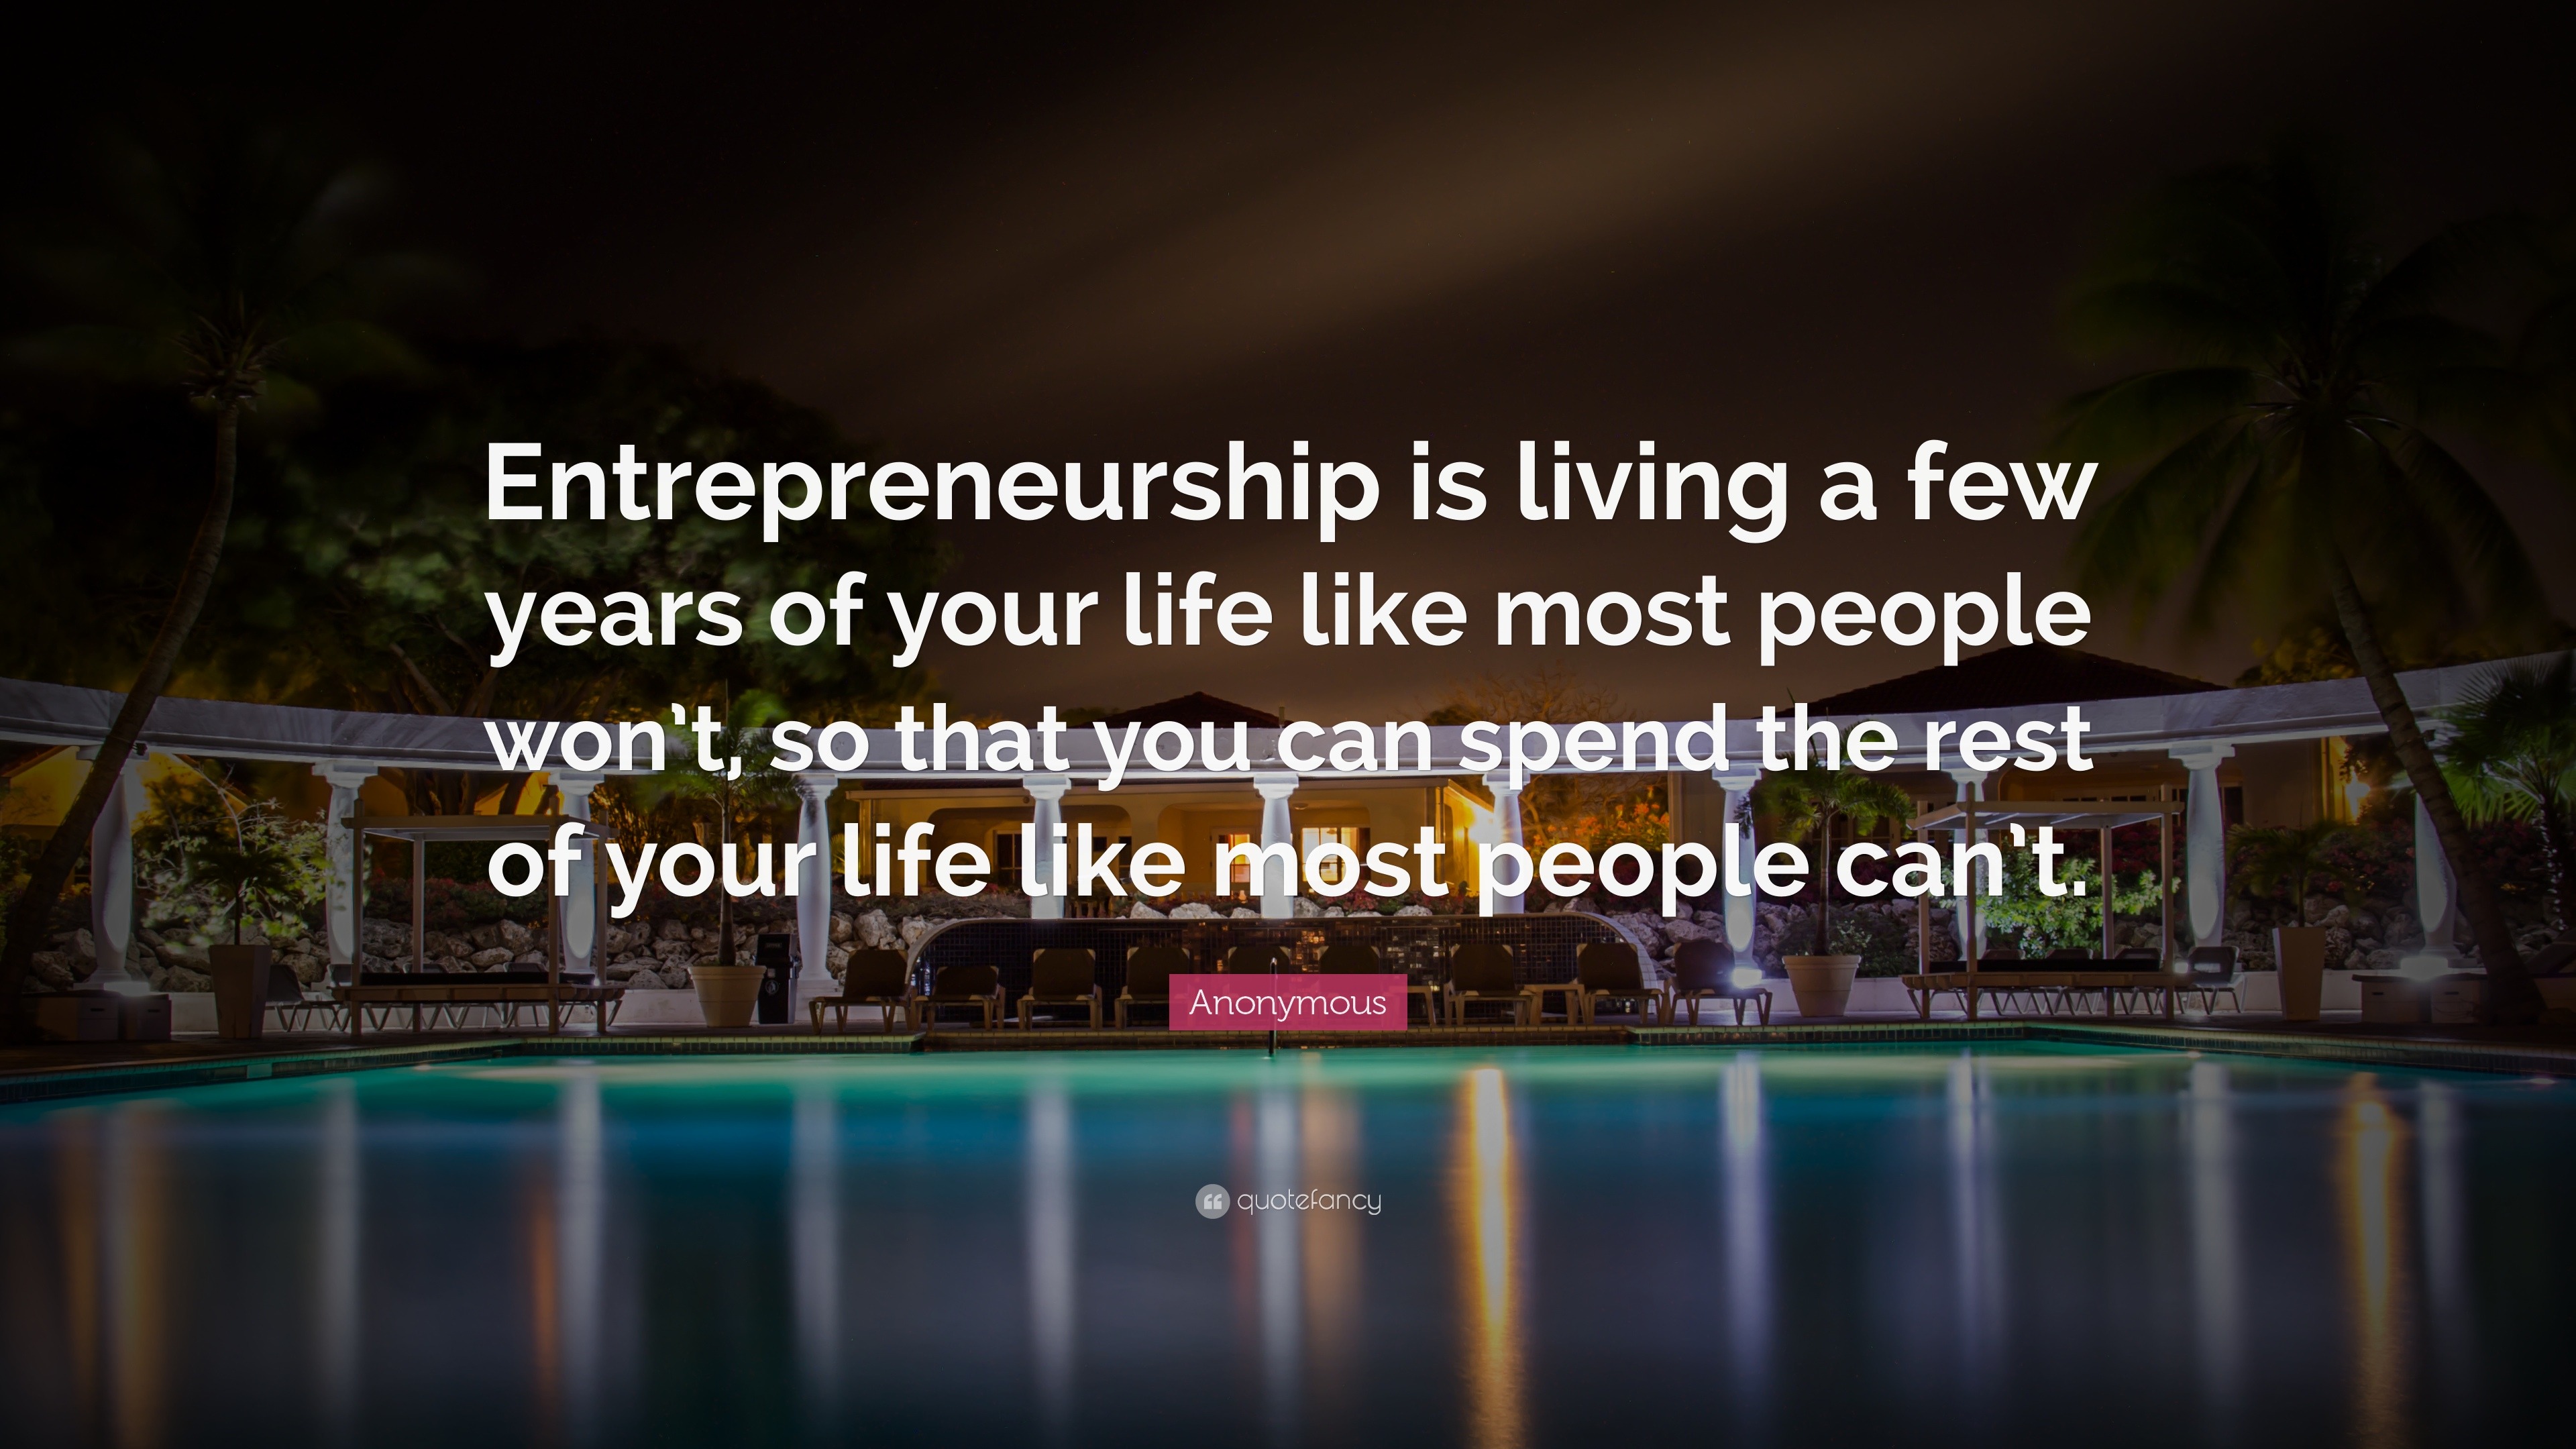 Anonymous Quote “Entrepreneurship is living a few years of your life like most people